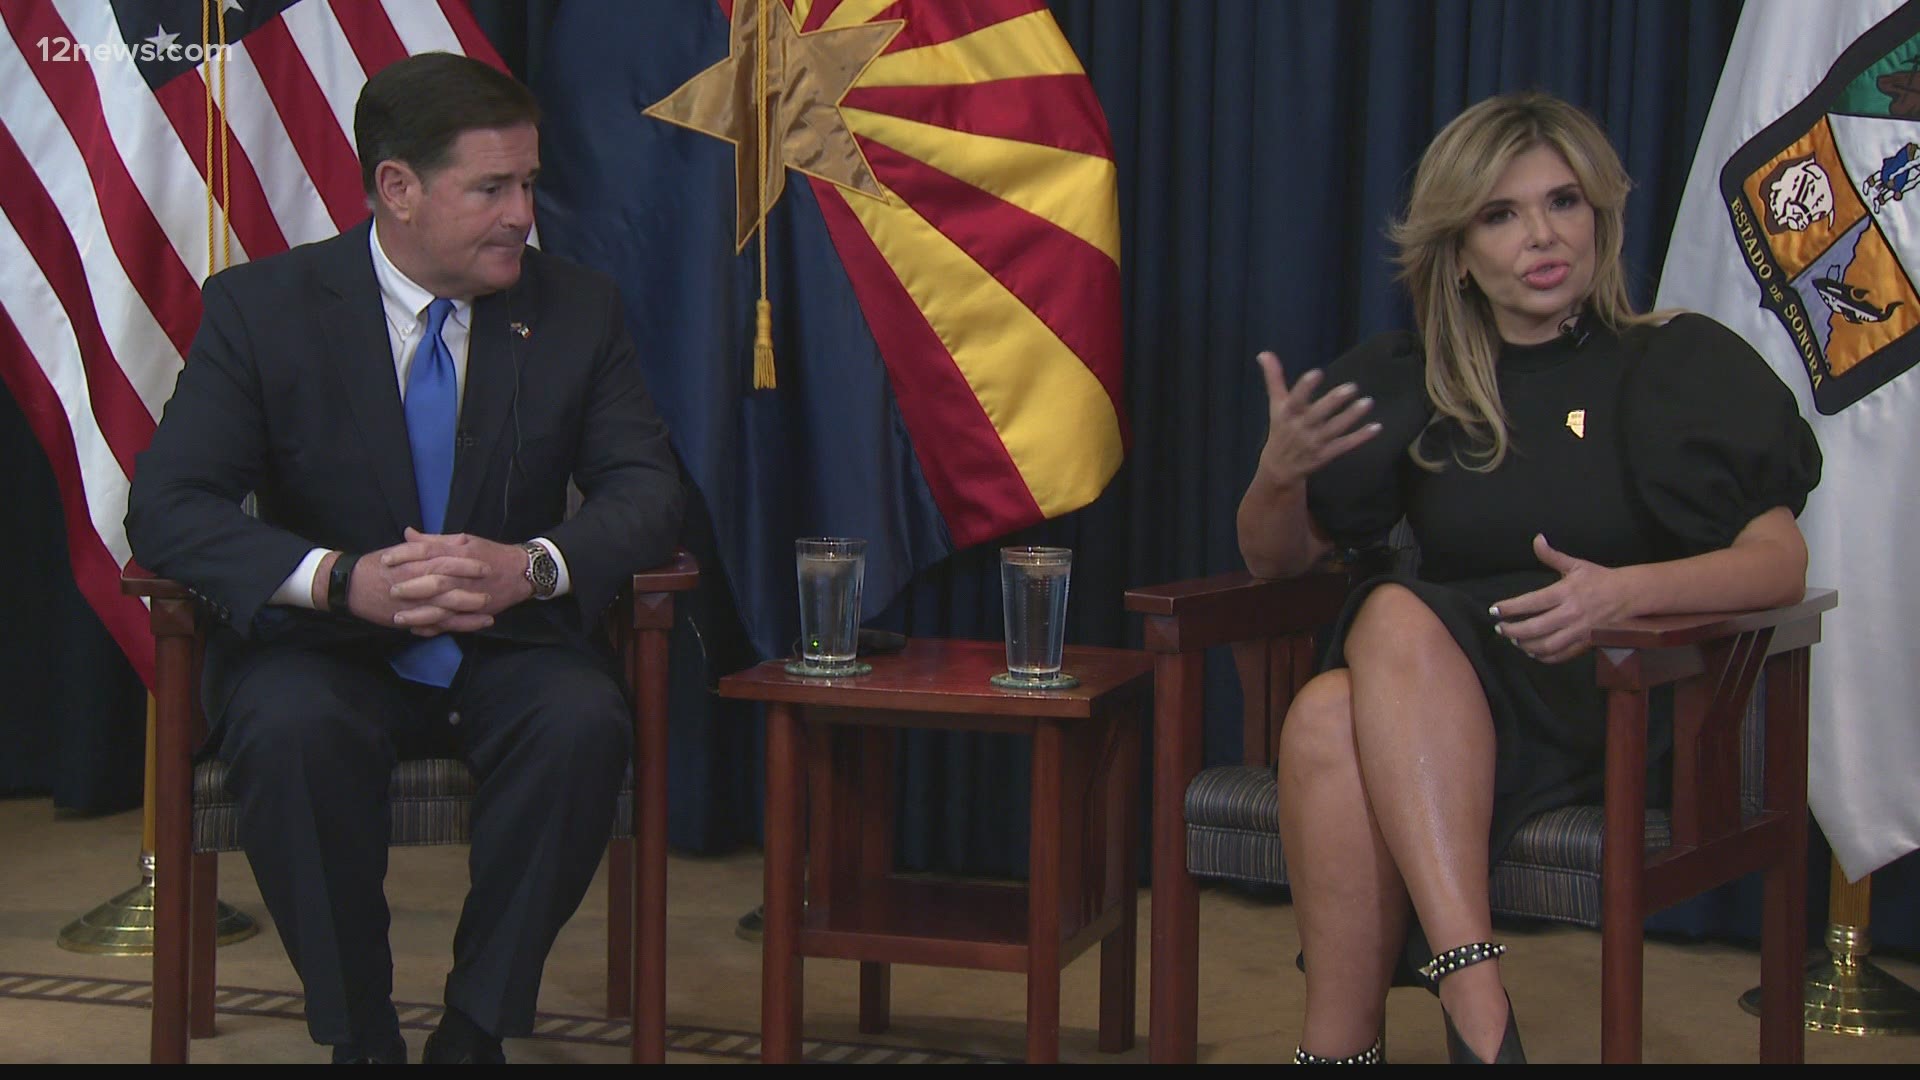 The governor of Sonora, Mexico, Claudia Pavlovich, met with Arizona's Governor Doug Ducey on Tuesday. The governors spoke about the humanitarian crisis at the border